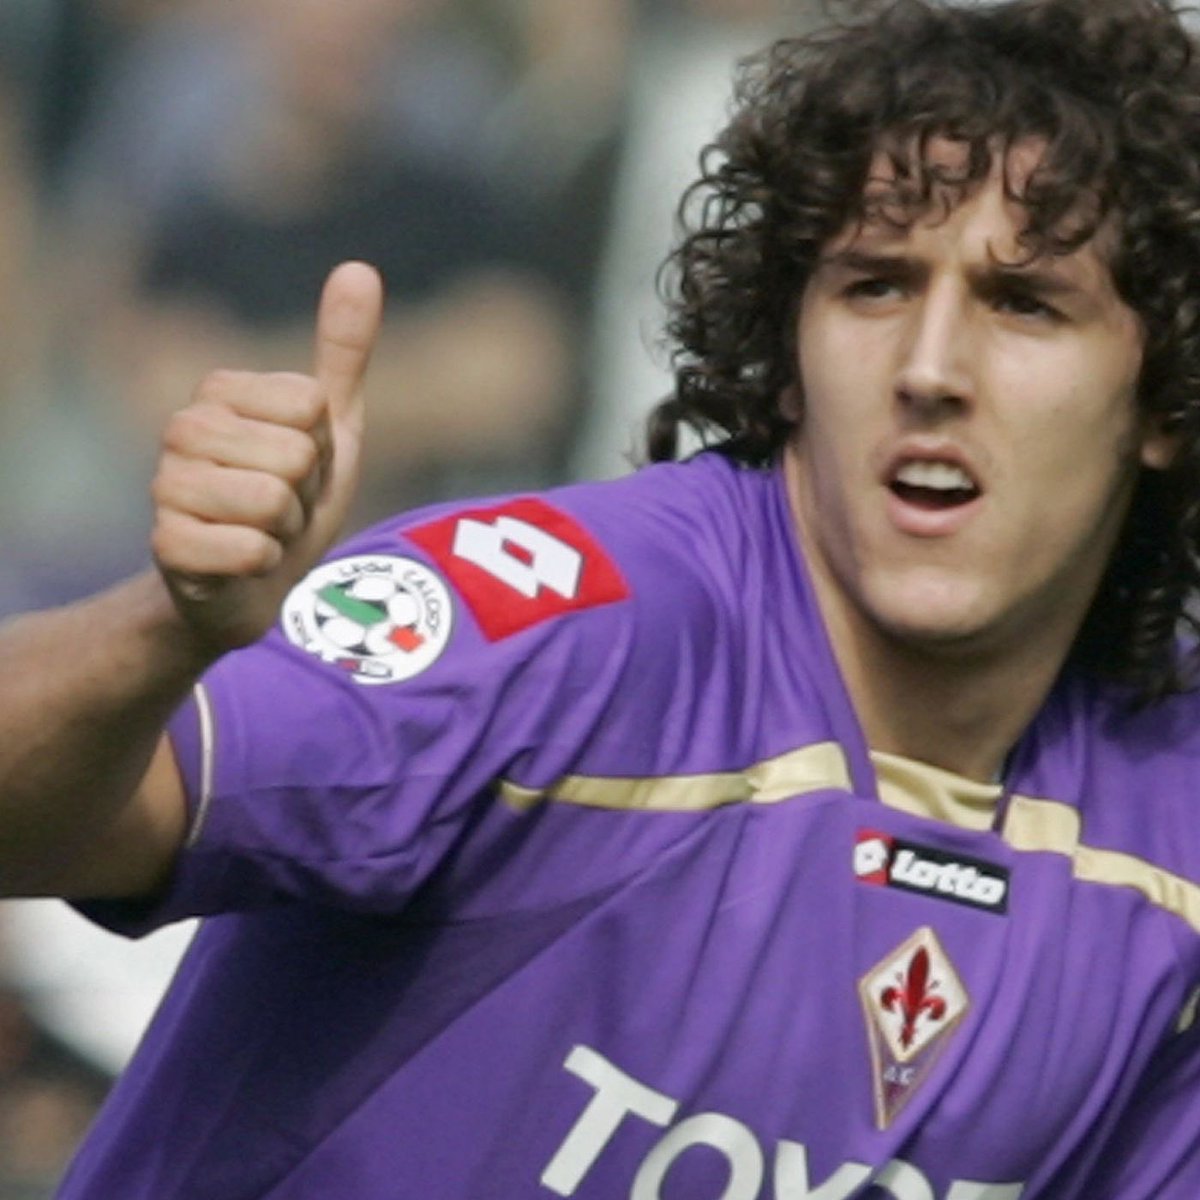 I miss Stevan Jovetic’s perm man, no one in football nowadays has curls as good